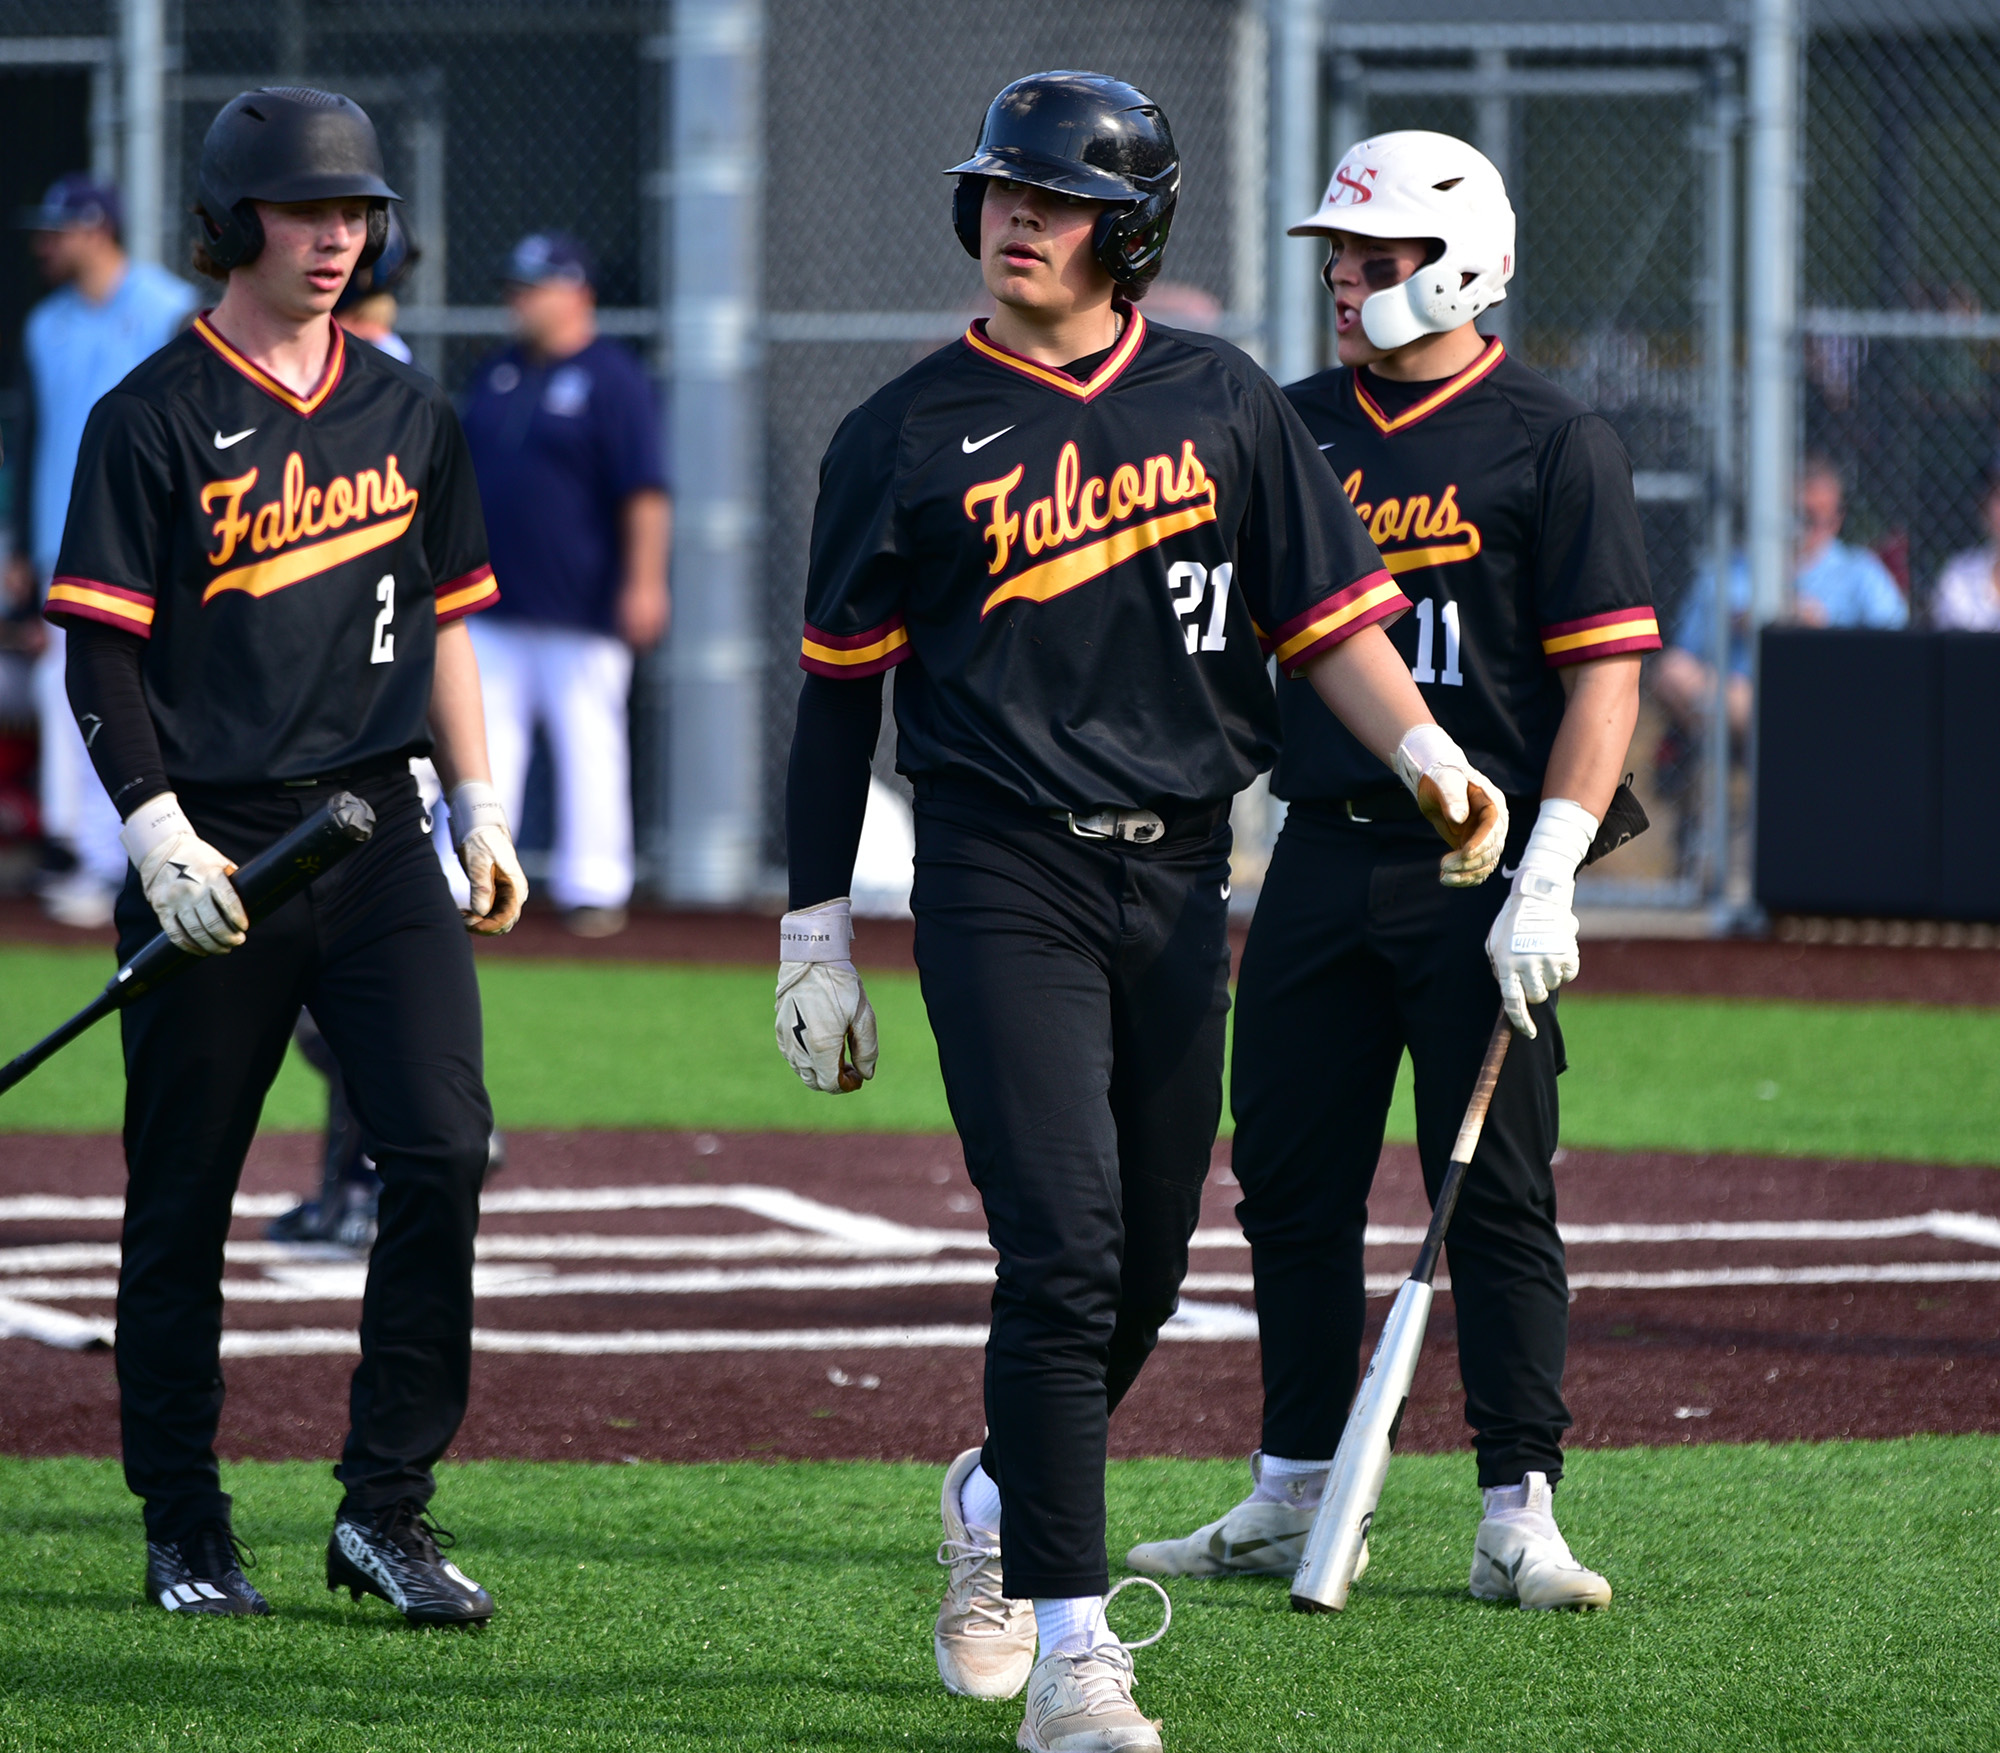 Prairie sophomore Isaac Watson, center, walks away after getting tagged out at home Tuesday, May 9, 2023, during the Falcons’ 12-4 loss to Gig Harbor in a 3A bi-district playoff game at the Evergreen Athletic Annex.